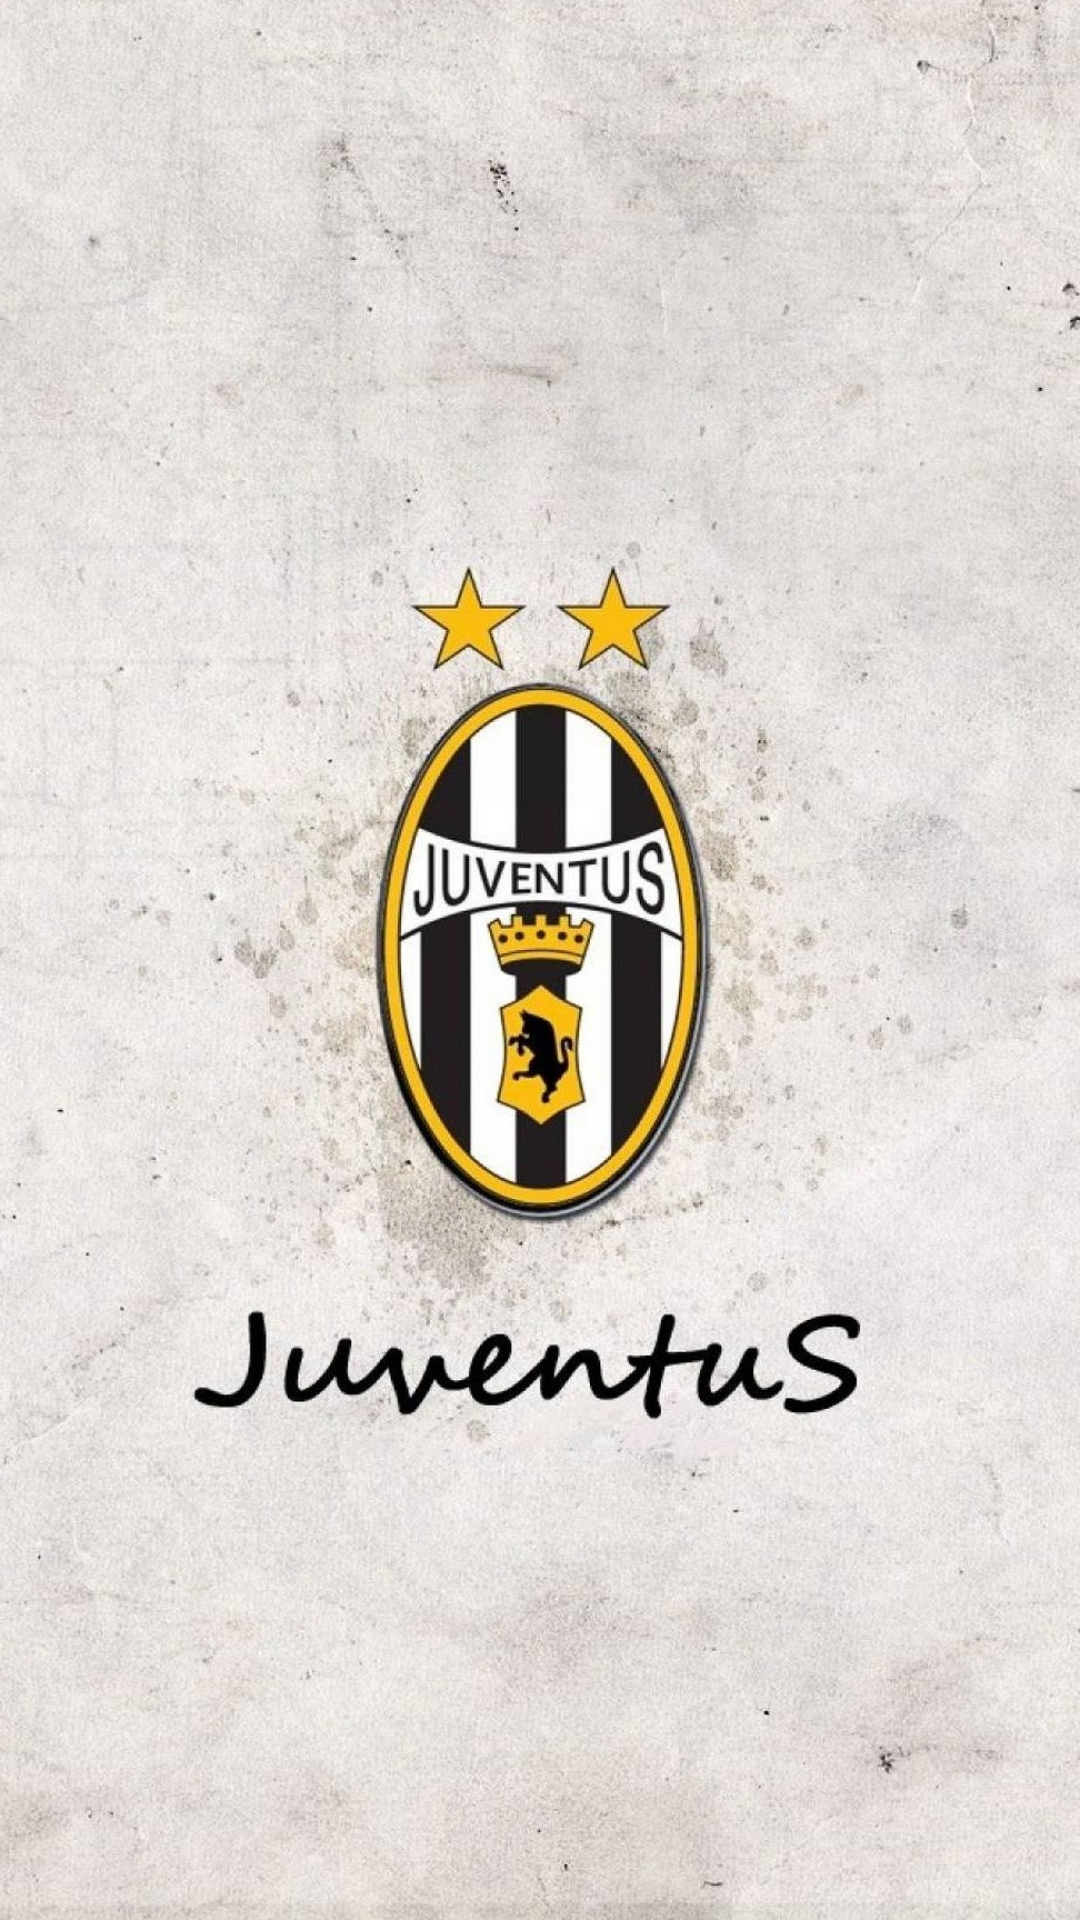 Juventus: Founded in 1897 a group of young Torinese students, The badge used in 1989 – 2004. 1080x1920 Full HD Wallpaper.